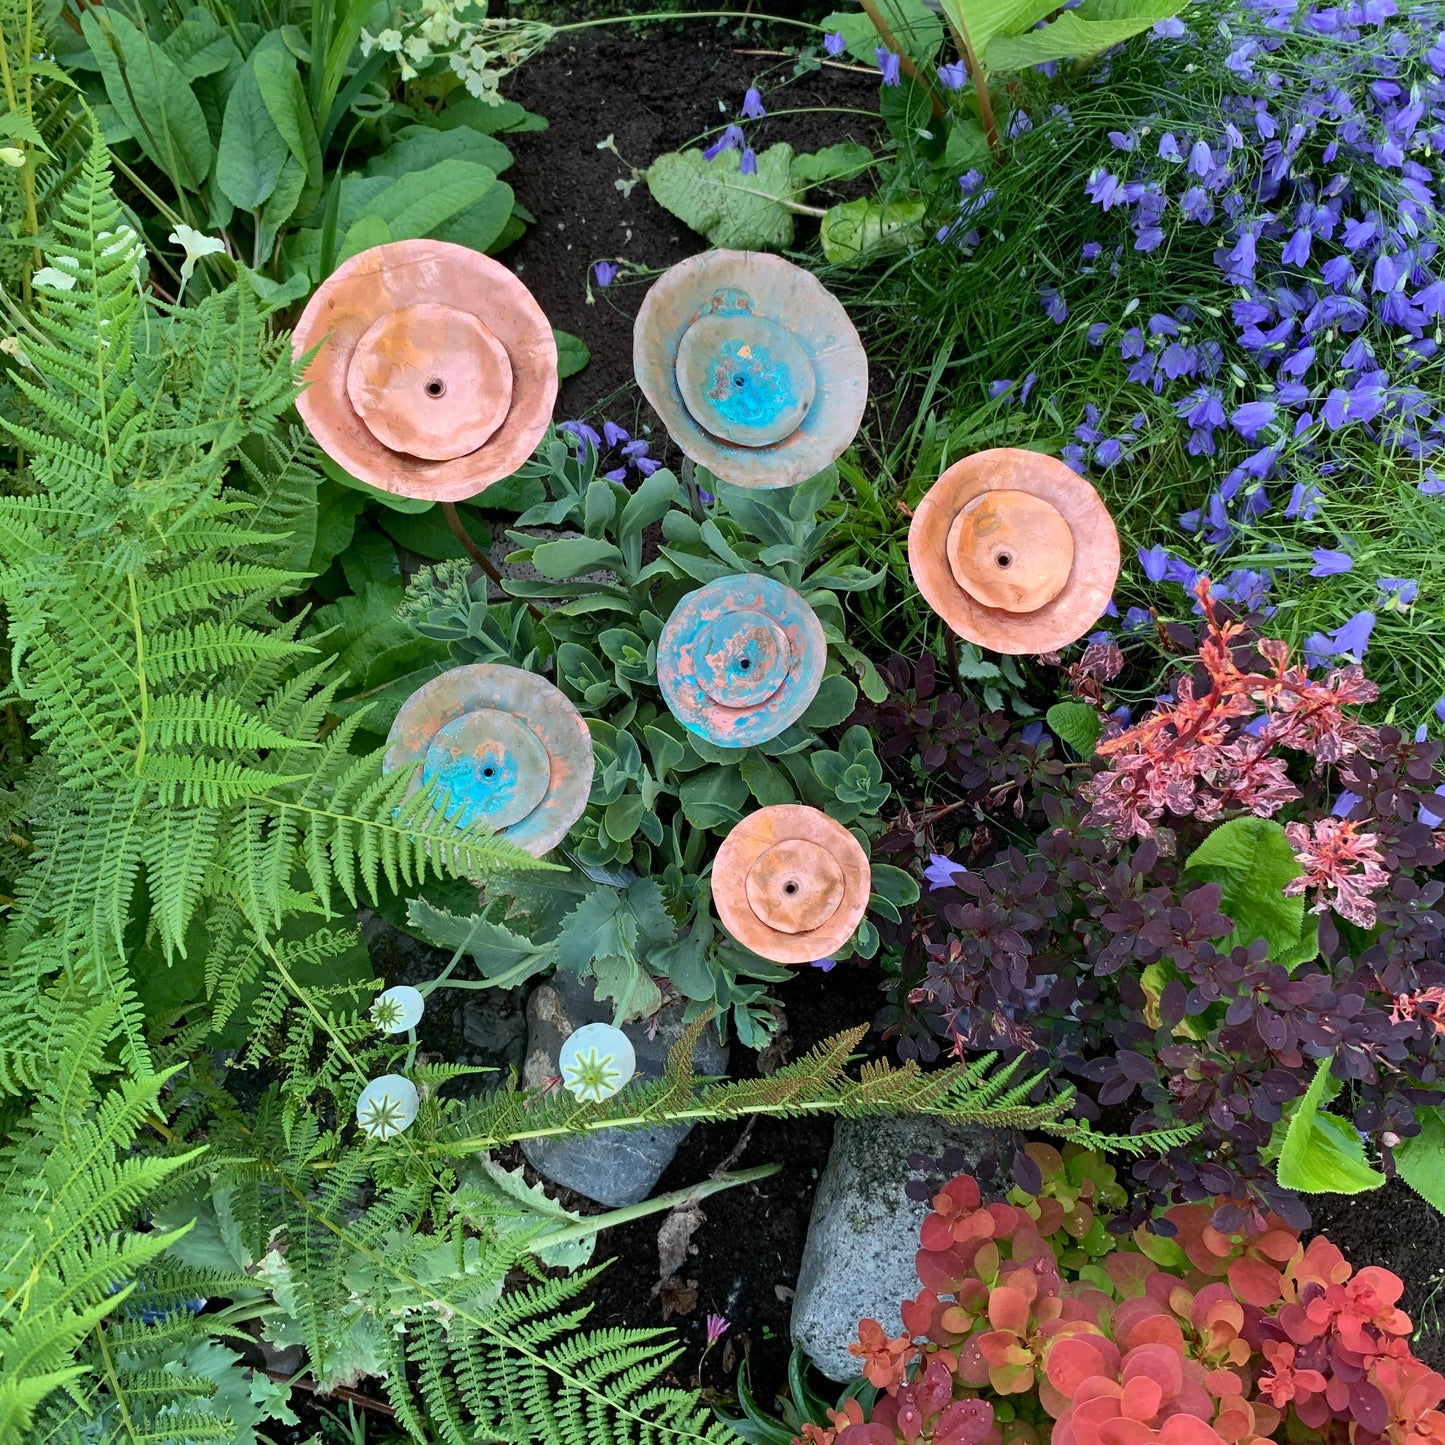 Copper and Patina Copper flowers in garden